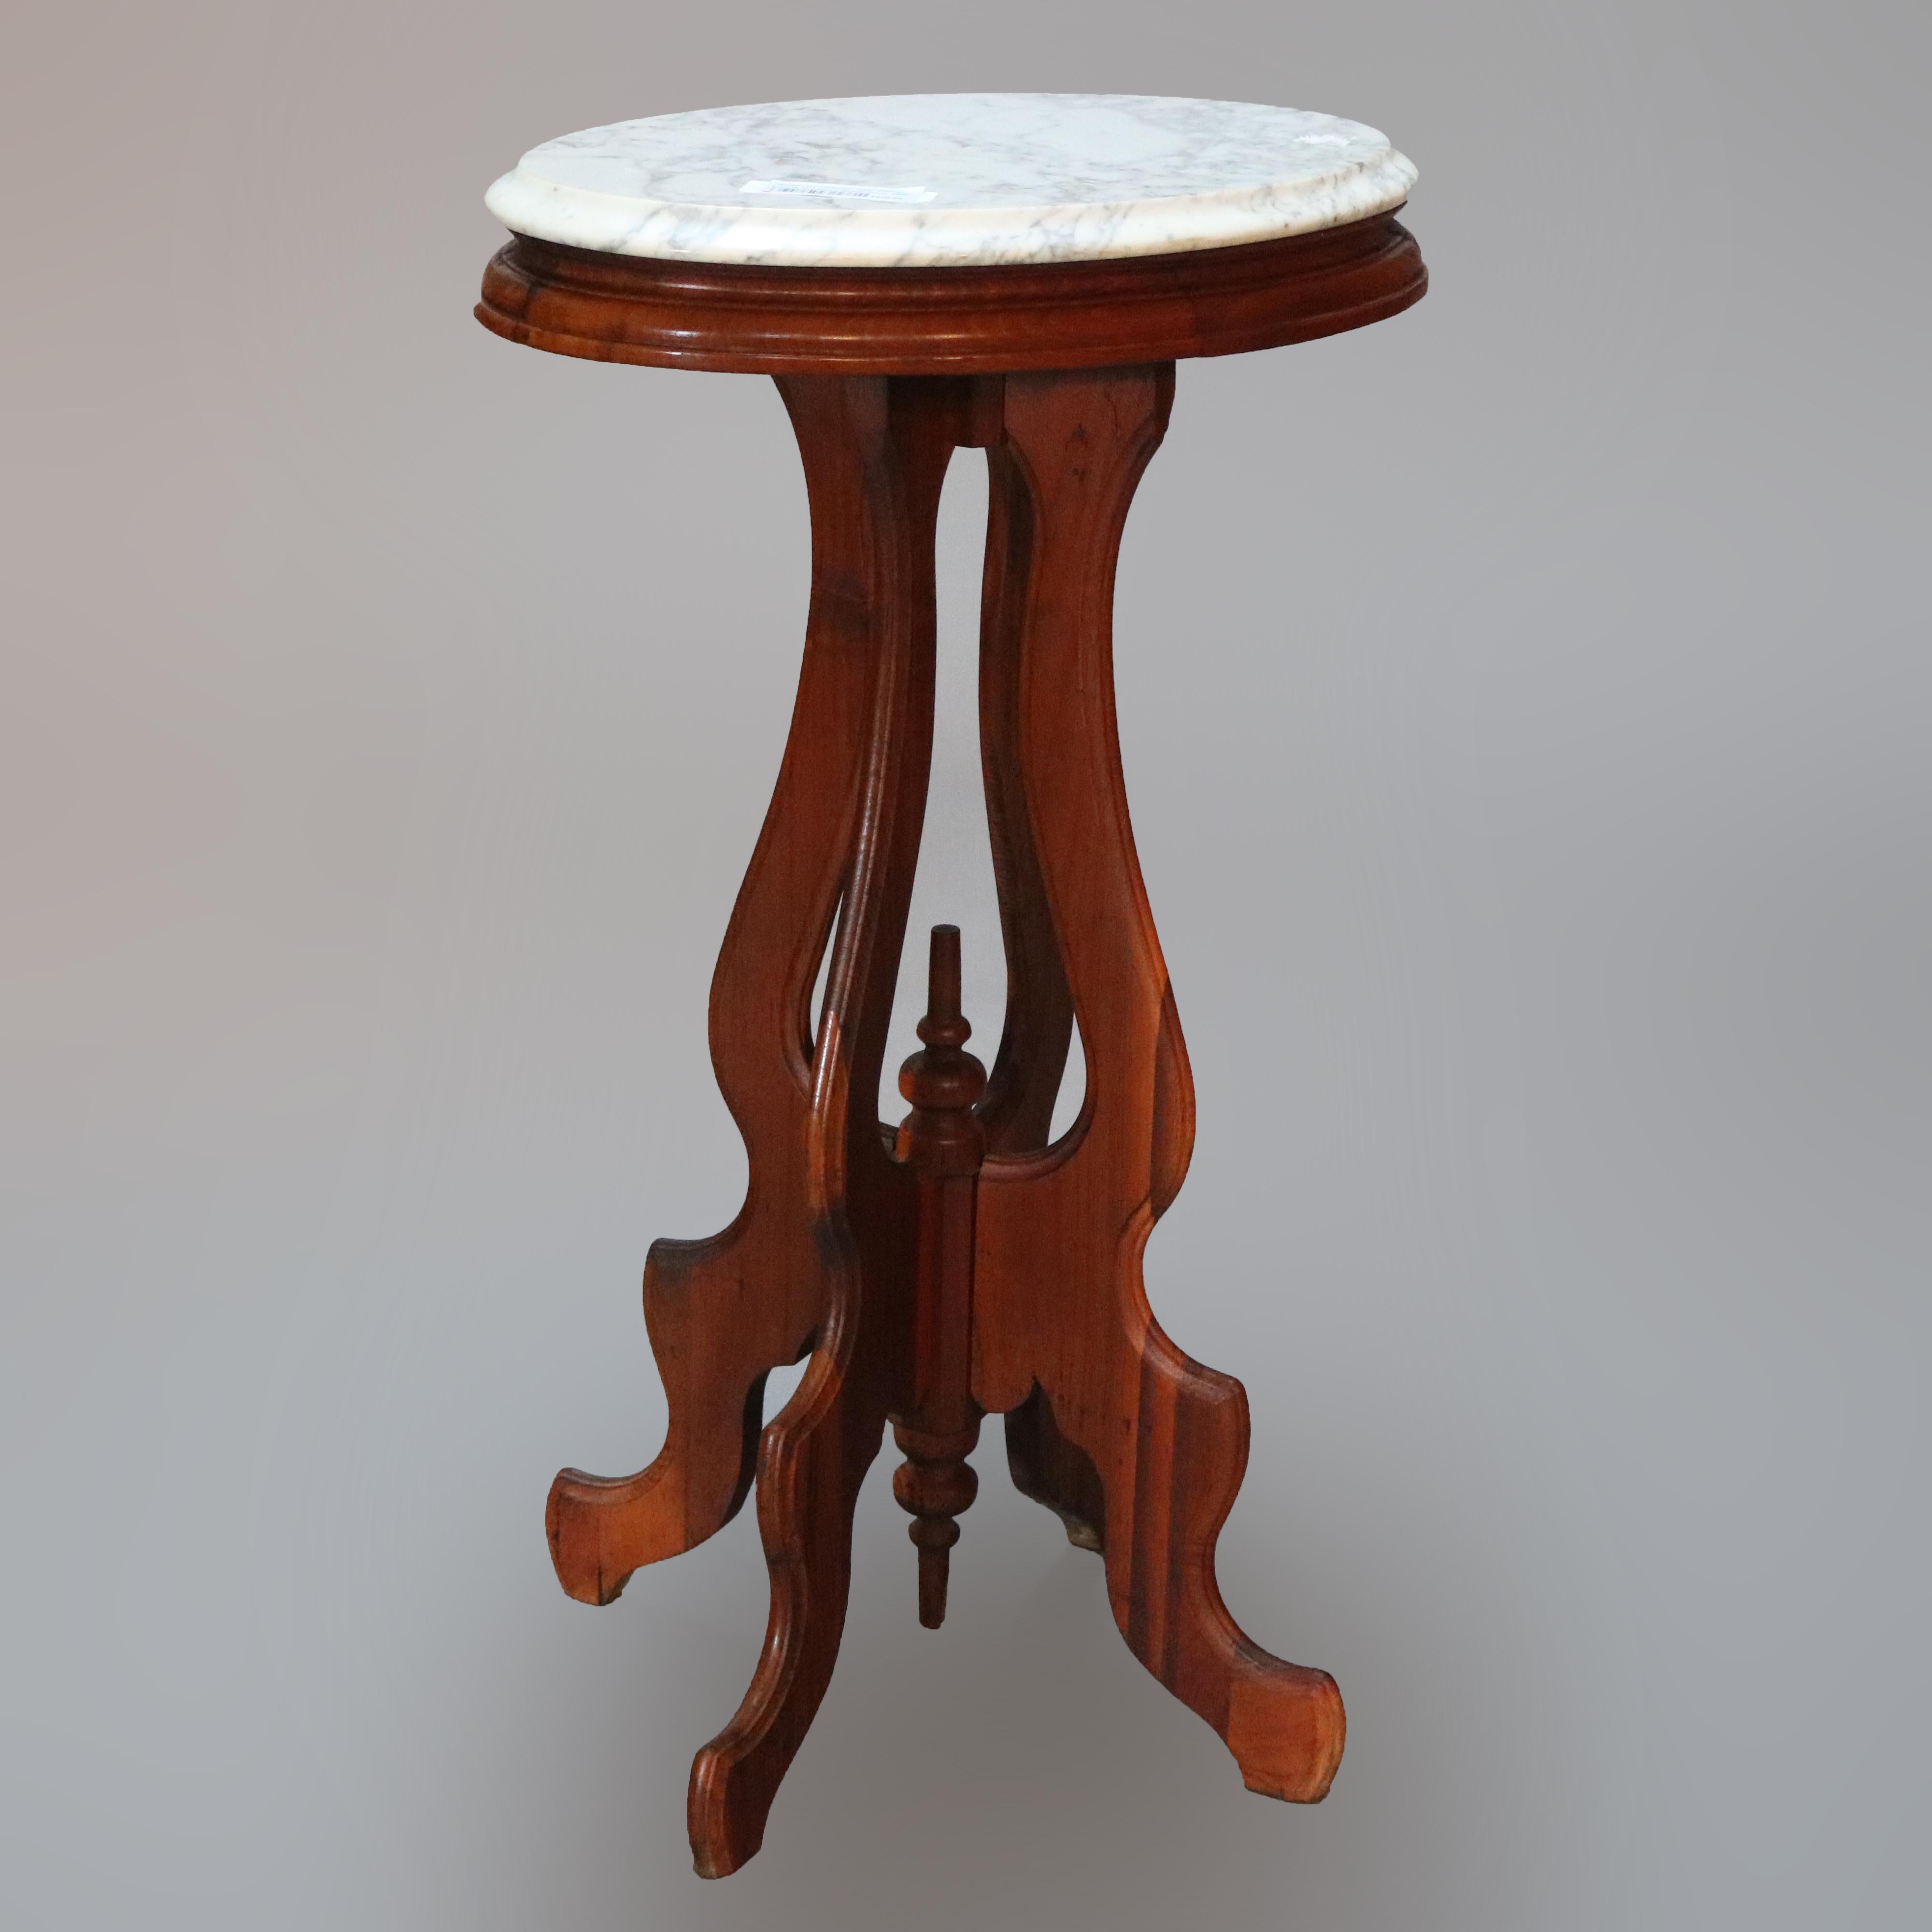 Beveled Antique Victorian Oval Walnut Marble Top Plant Stand, circa 1900